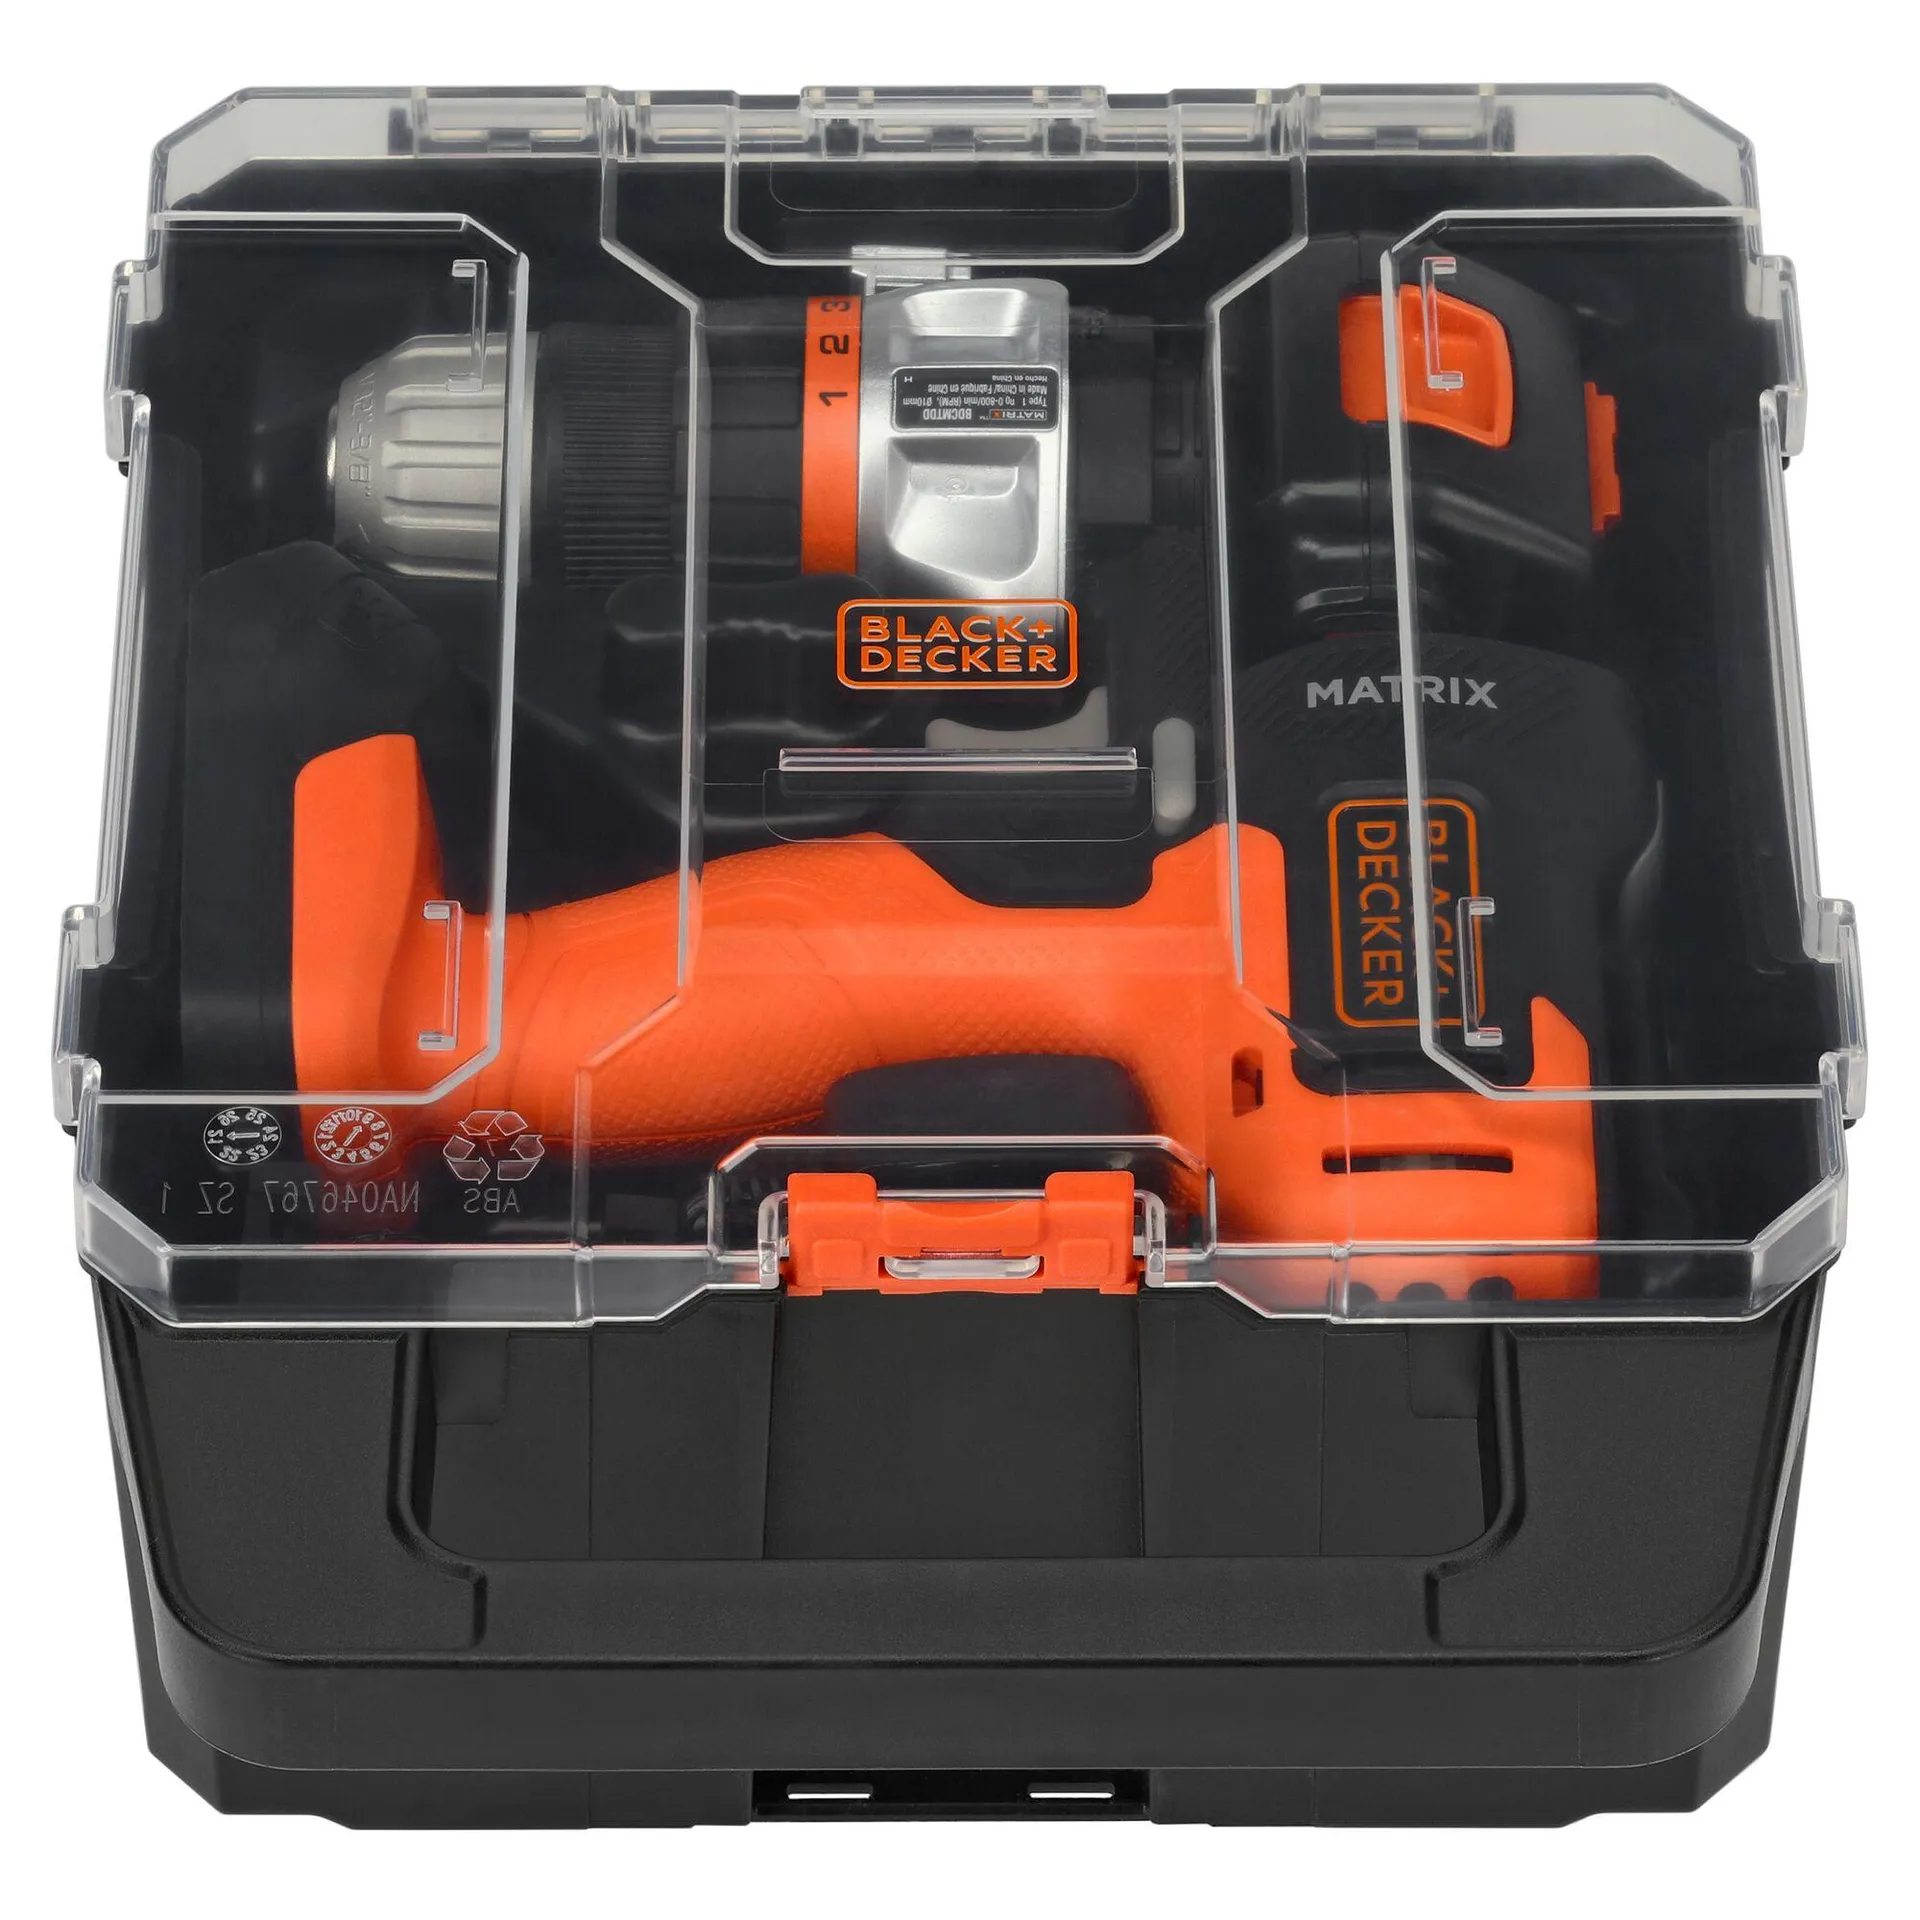 MATRIX™ 20V MAX* Drill Kit, Includes Jig Saw Attachment, Storage Case, Battery and Charger